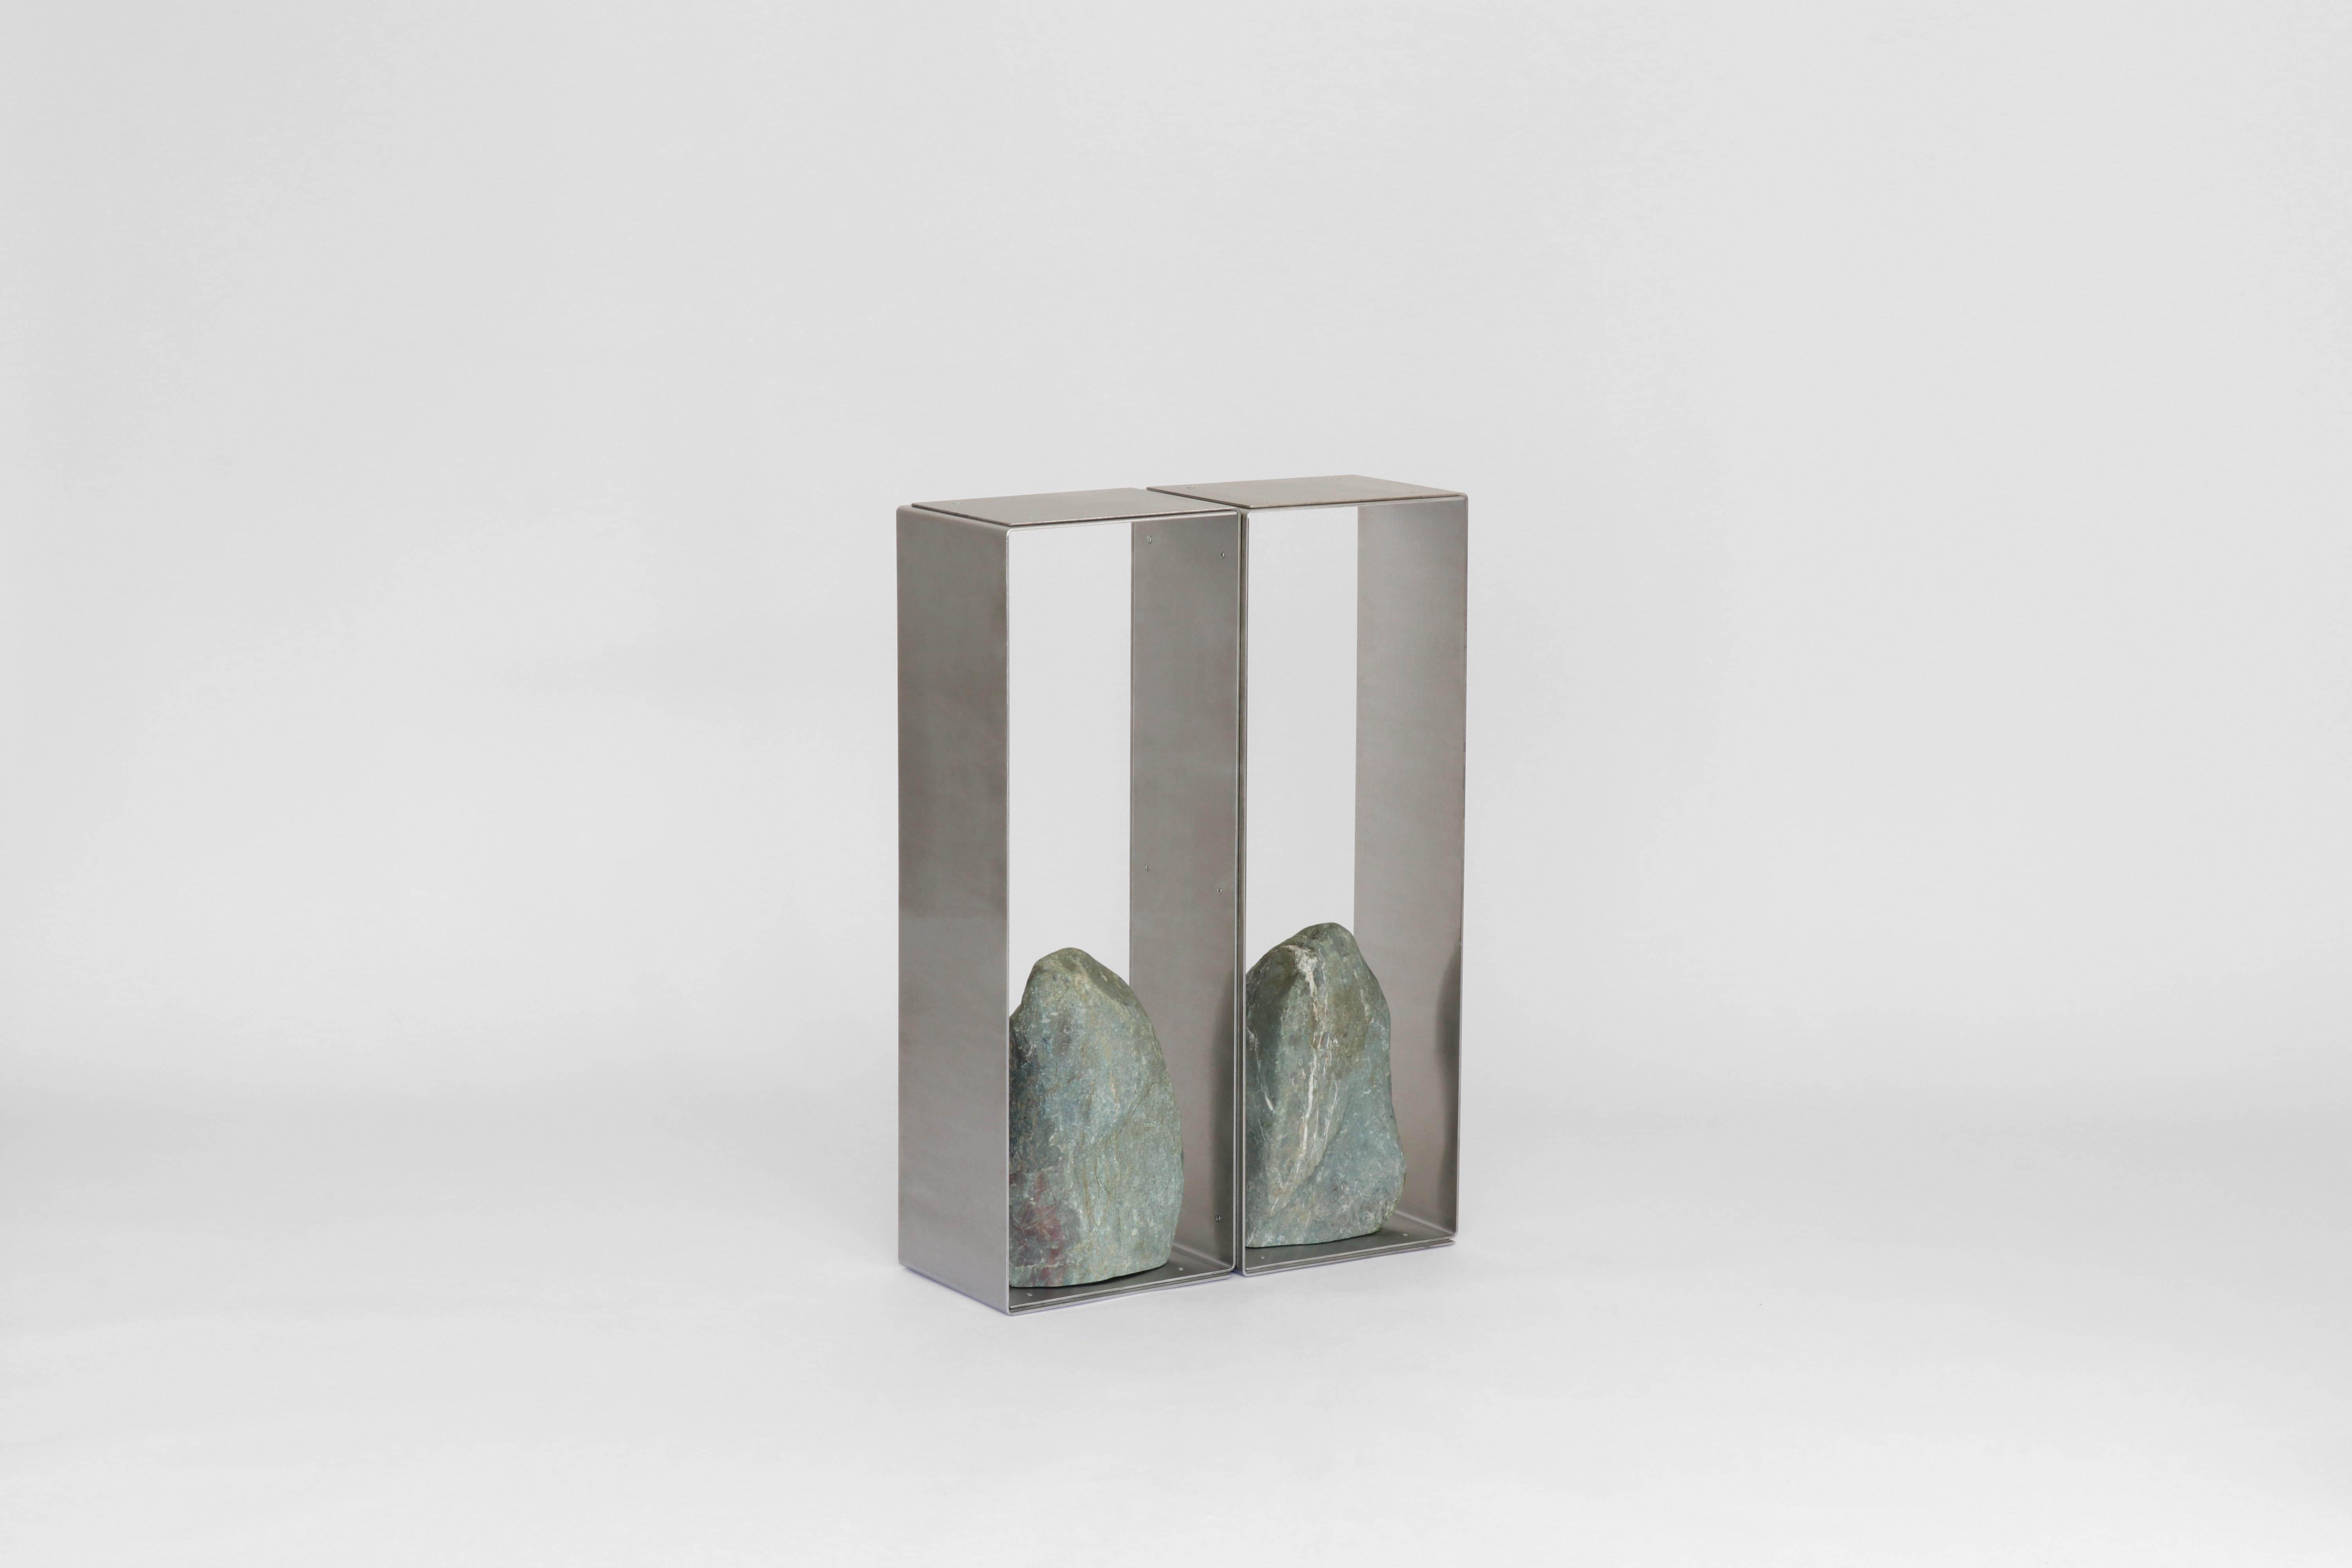 Steel and stone console table by Batten and Kamp
2020
Shelter To Ground Collection
Dimensions: 50 W x 20 D x 71 cm H
 Two sections - more can be added to
Materials: Hand finished stainless steel. Natural Stone

The stone is different with each piece